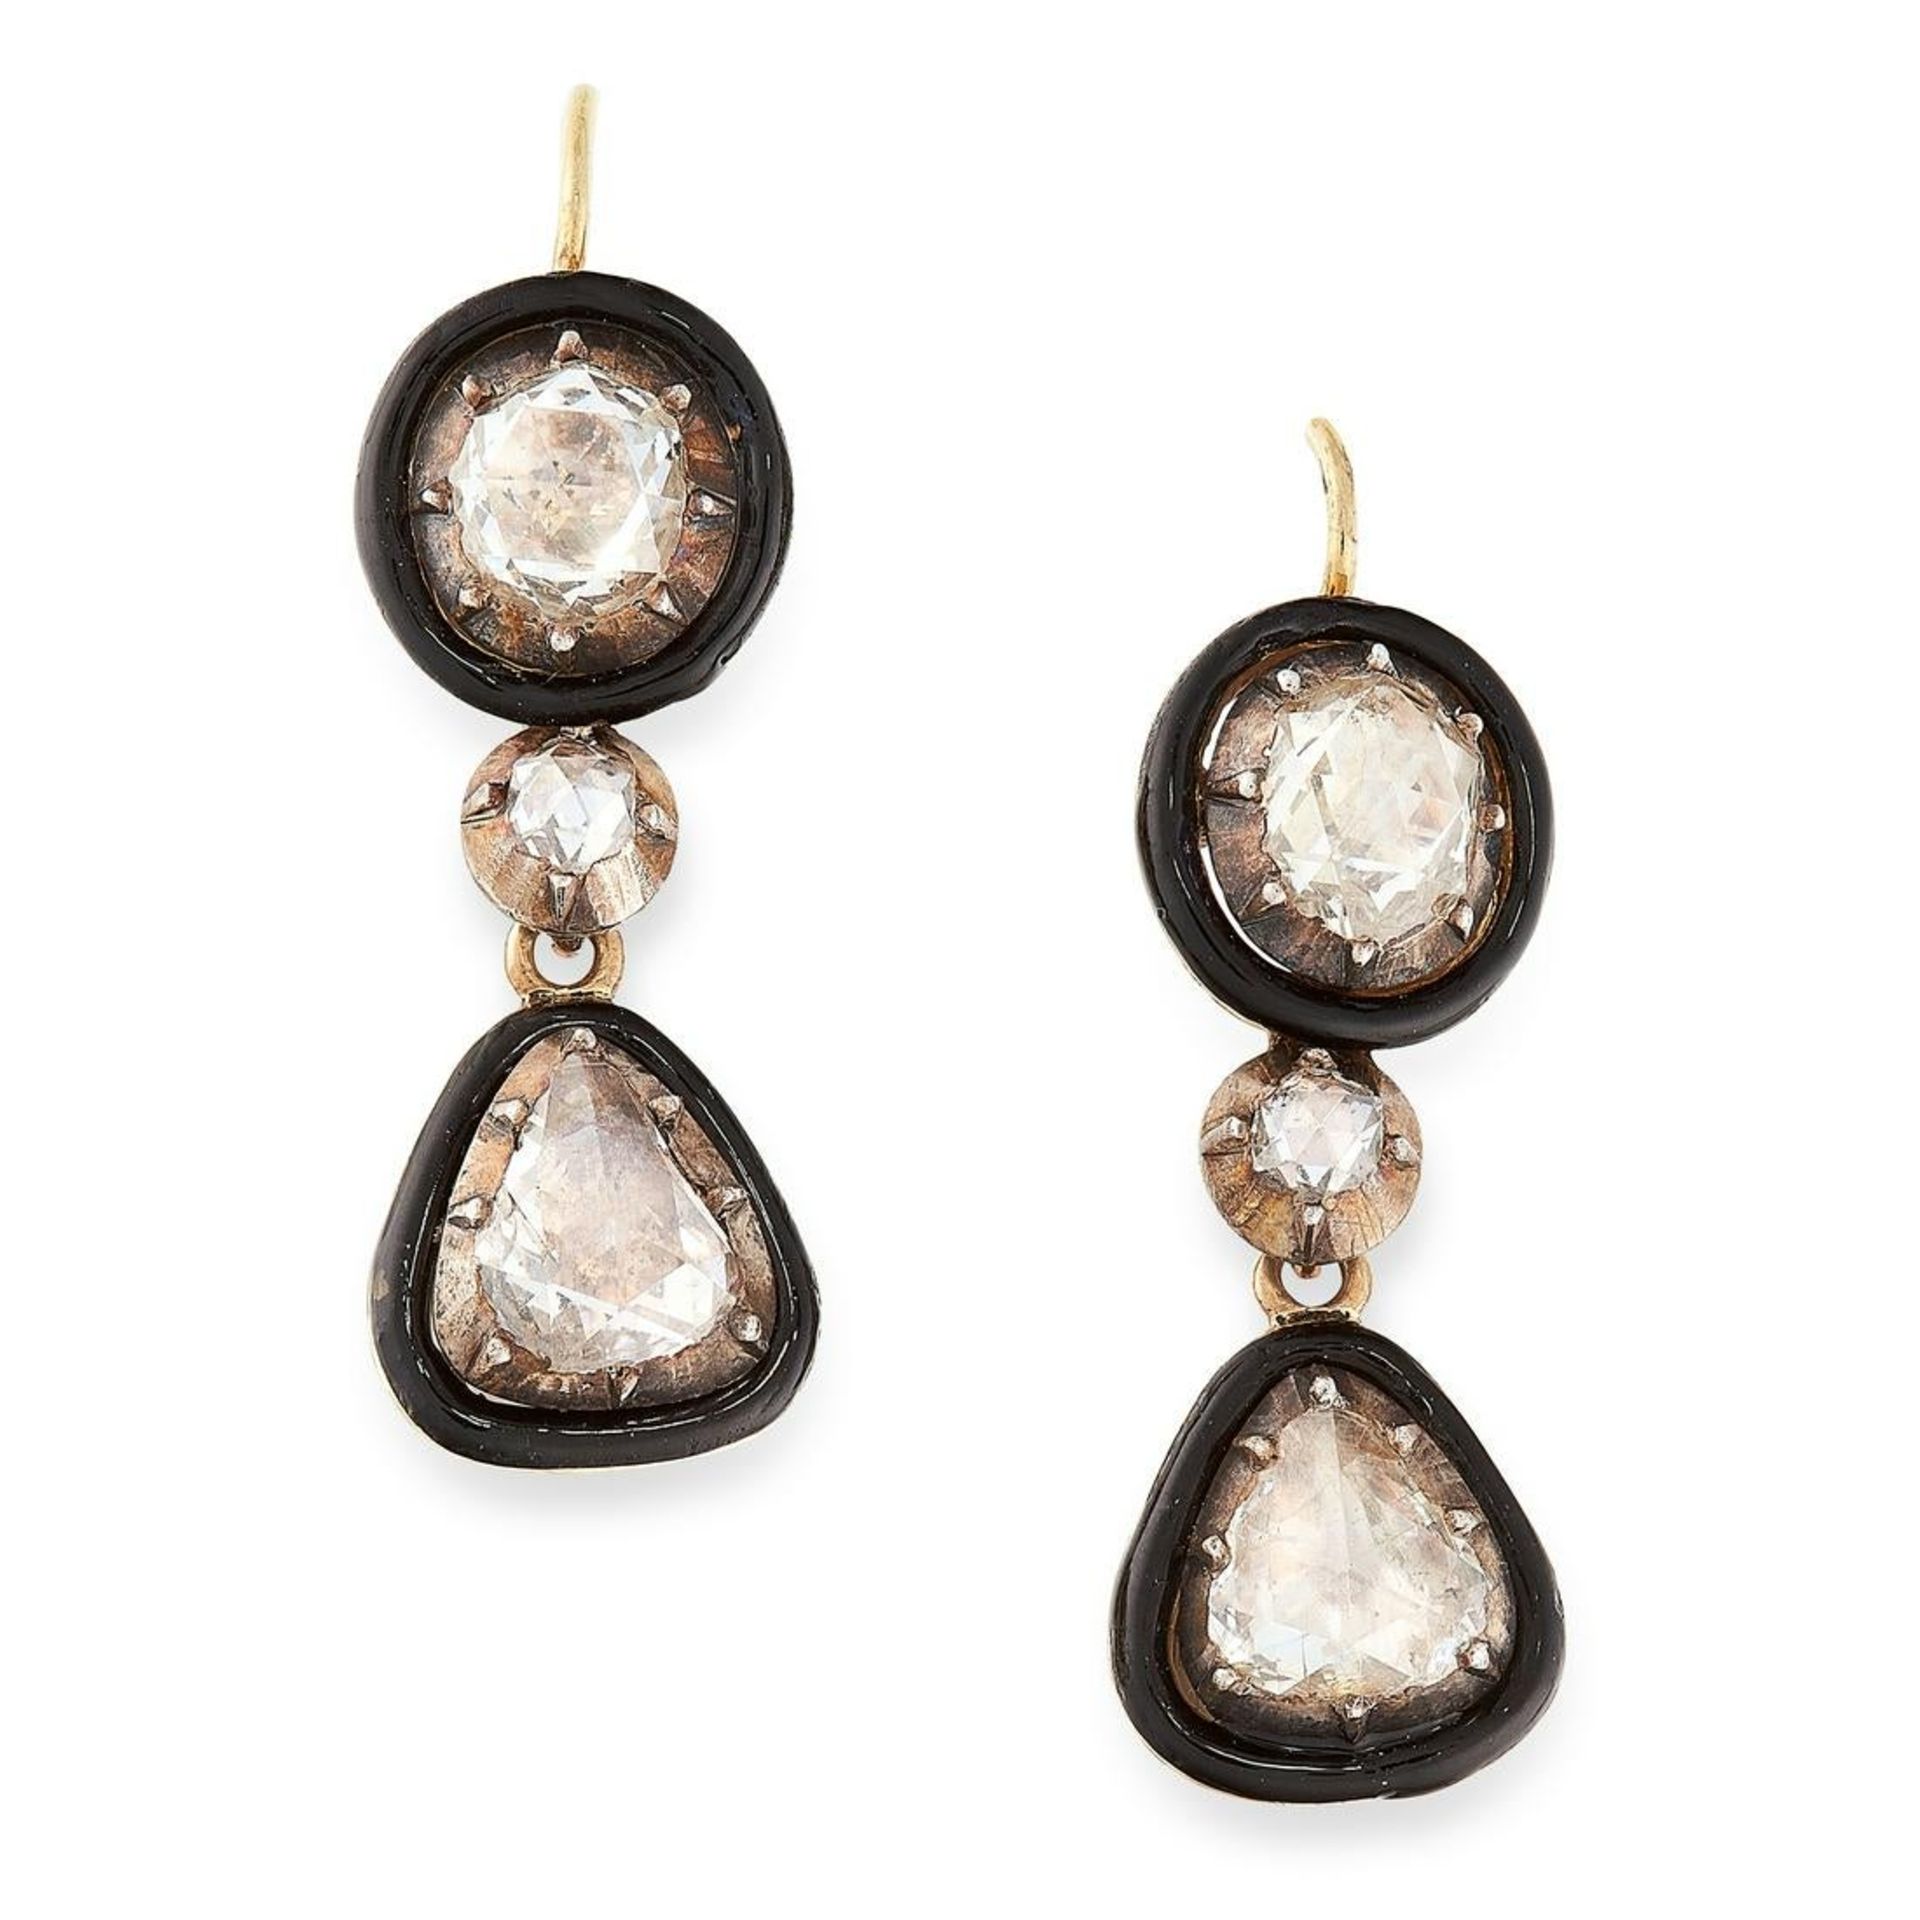 A PAIR OF ANTIQUE DIAMOND AND ENAMEL DROP EARRINGS in high carat yellow gold and silver, each set